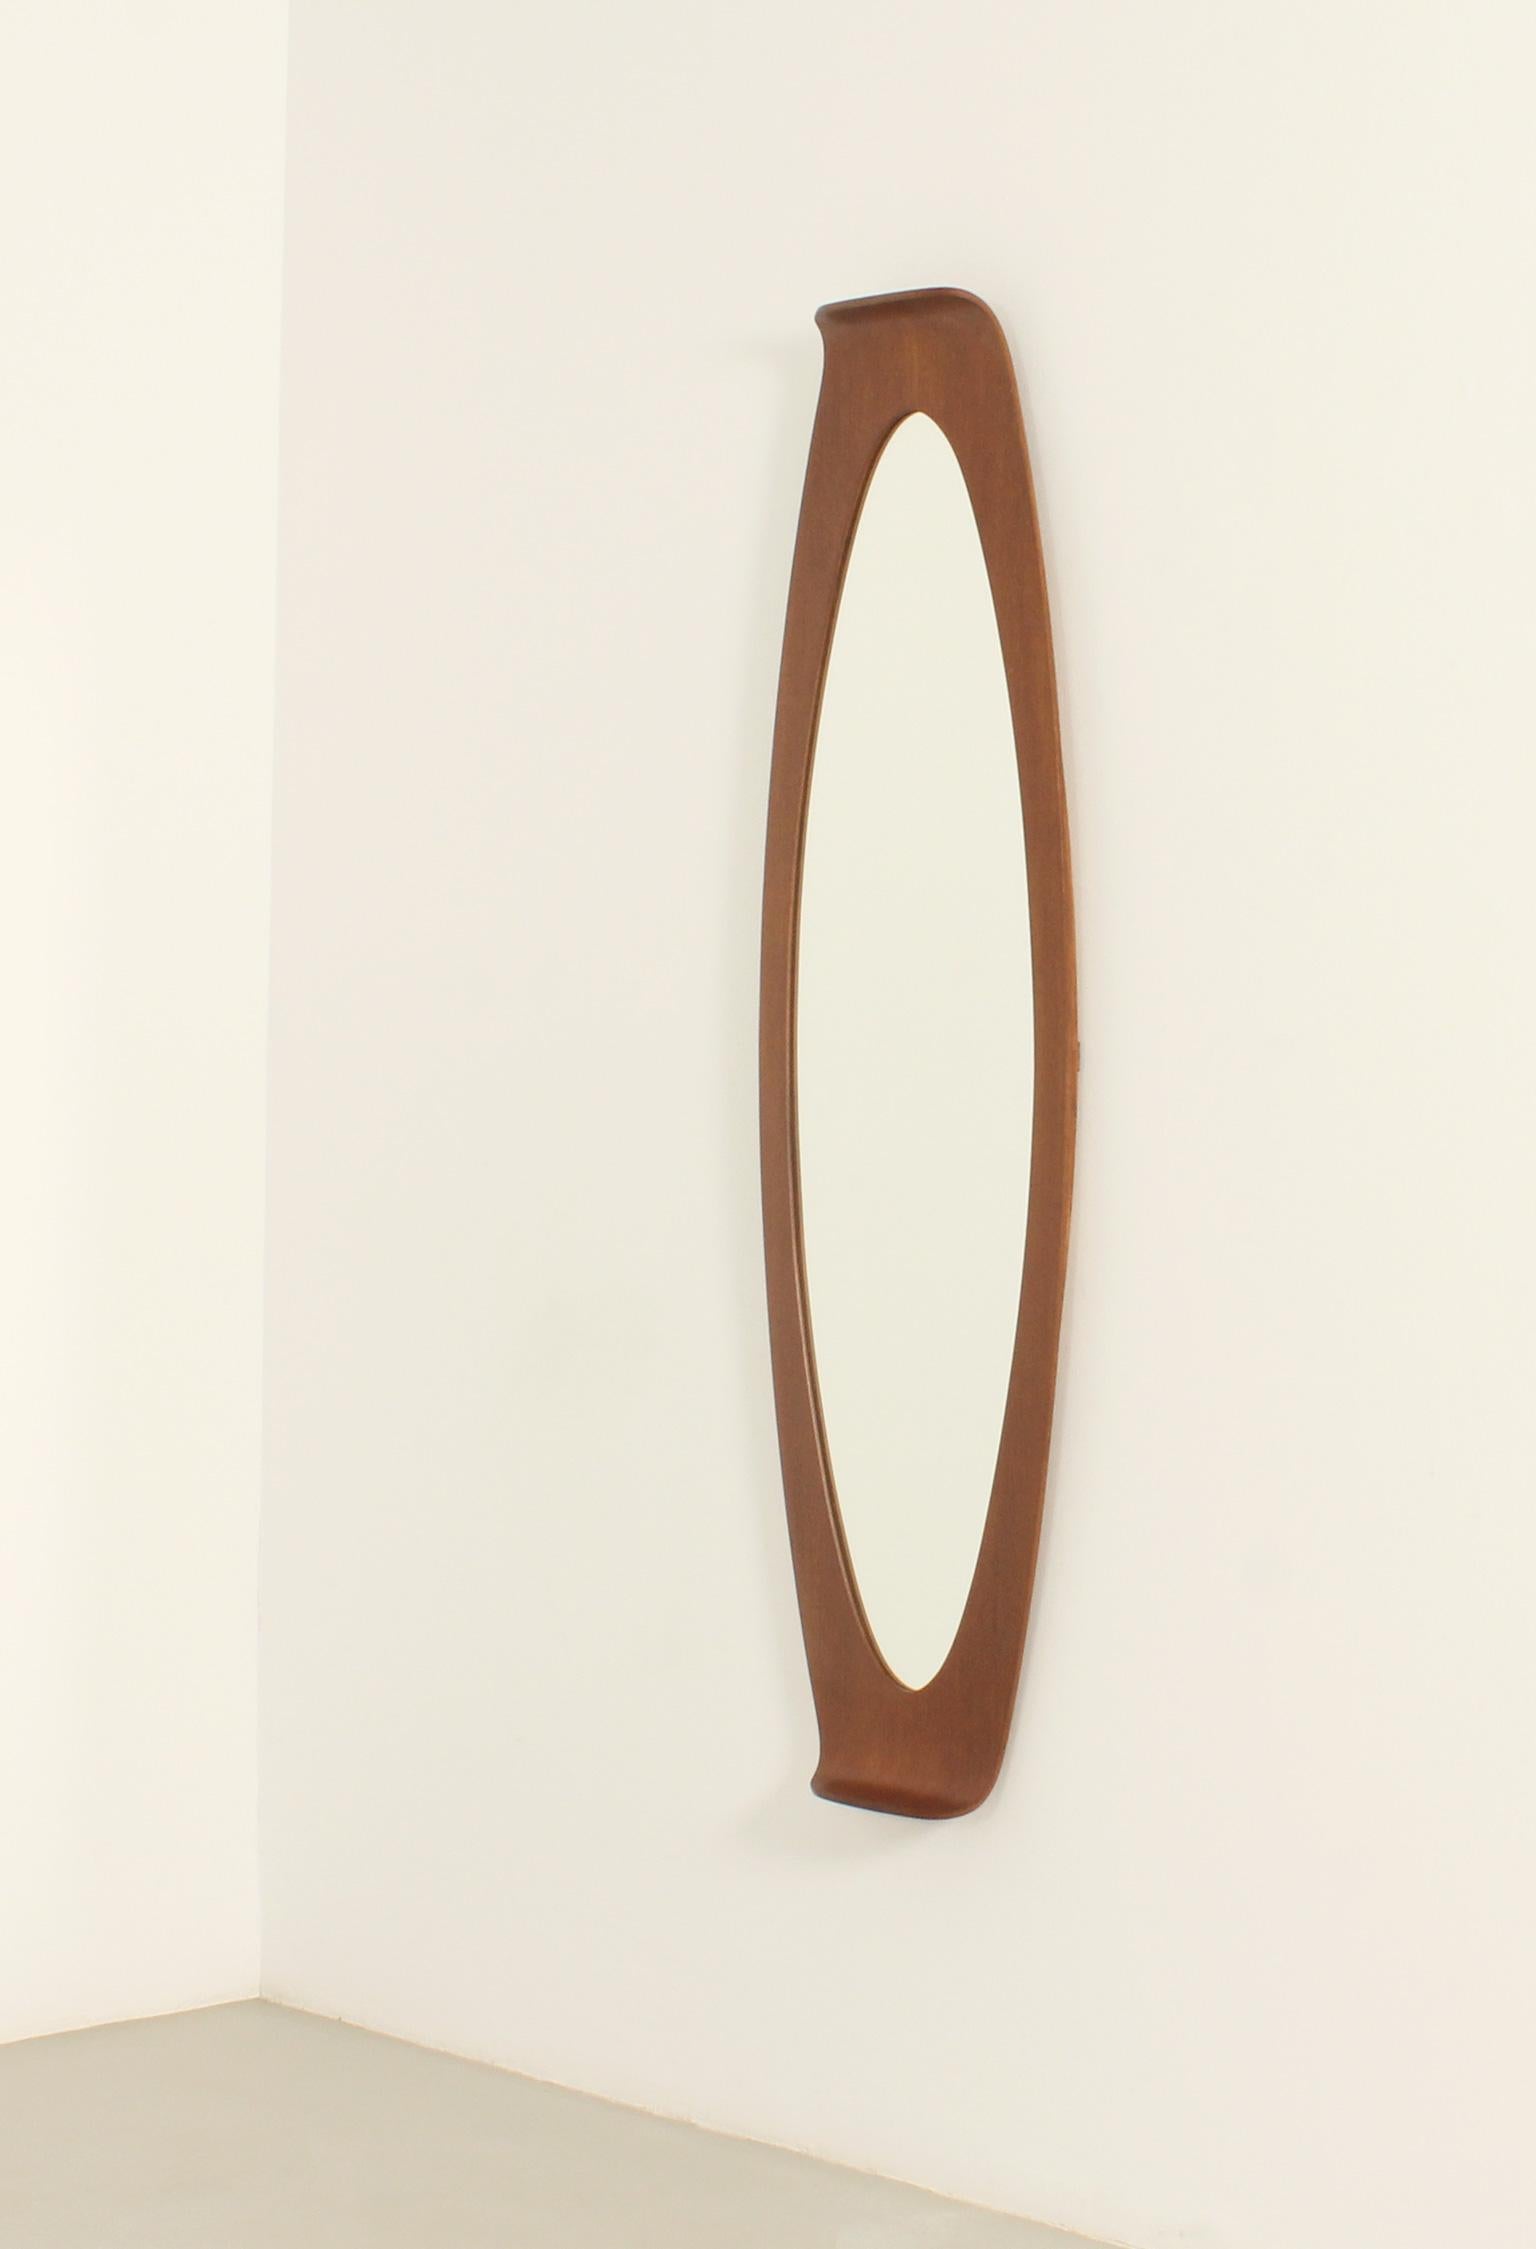 Large wall mirror by Franco Campo and Carlo Graffi for Home, Italy, 1950's. Curved teak wood frame with mirror. 